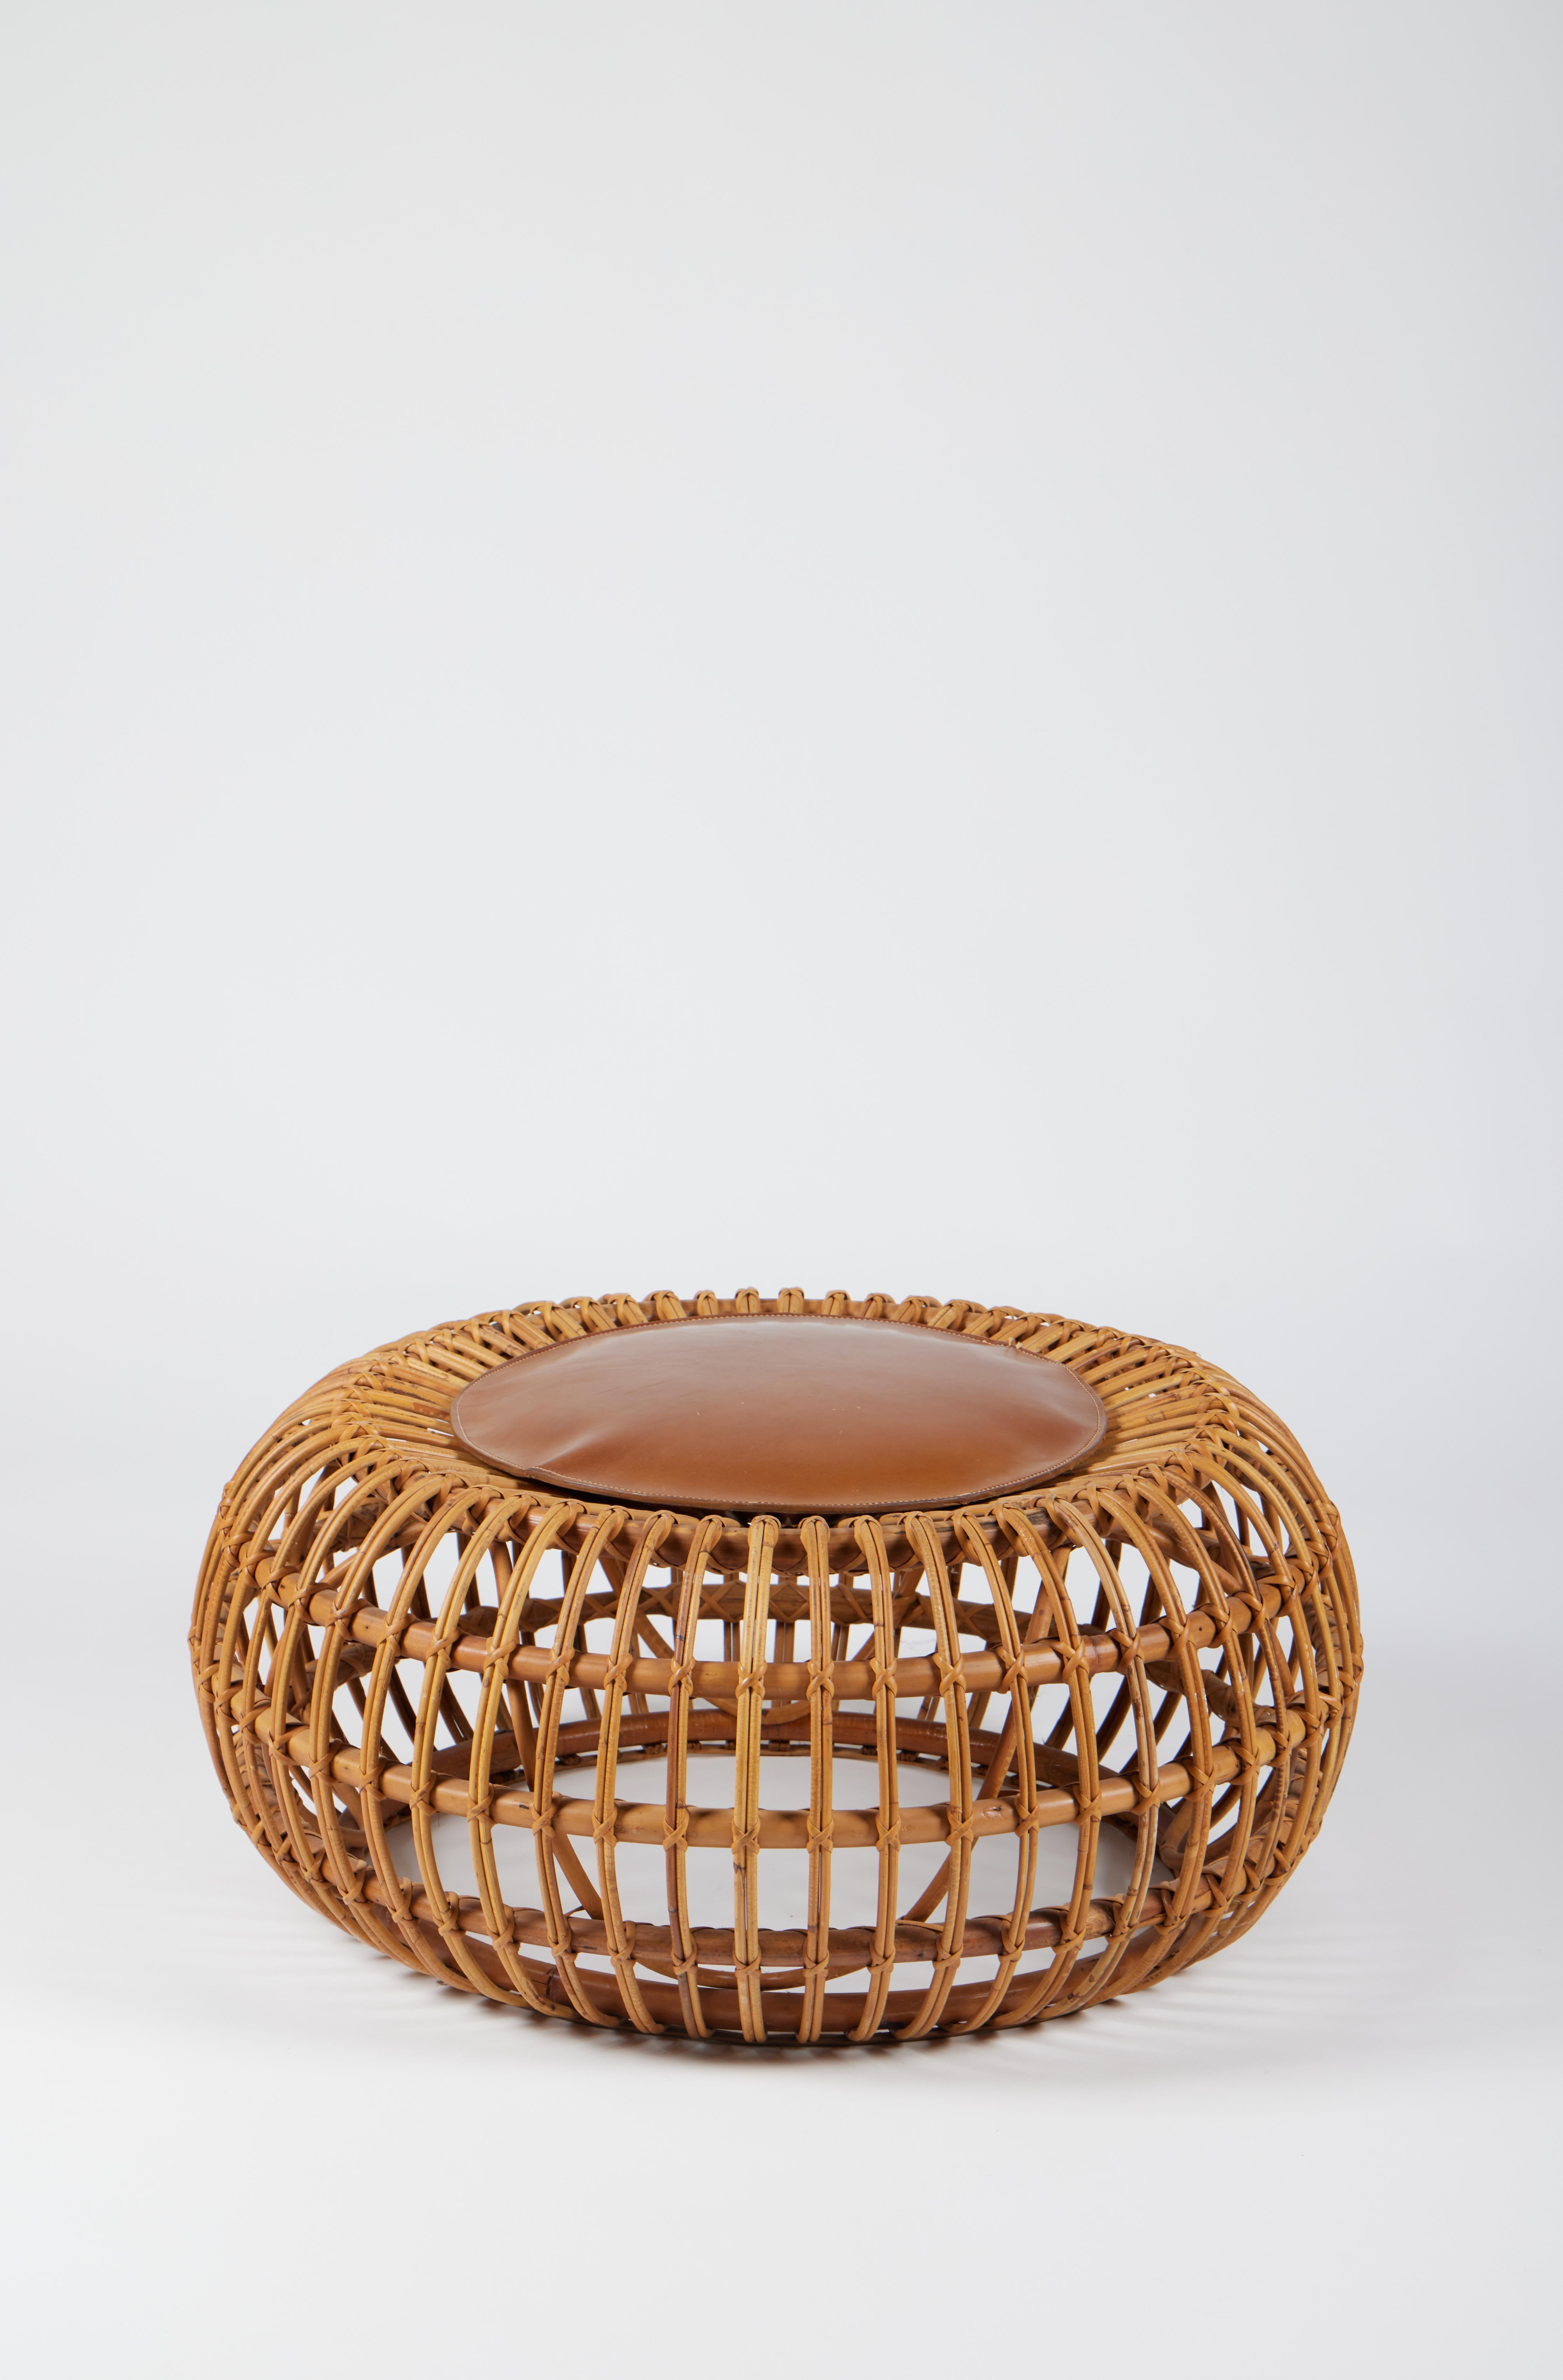 Leather Ico Parisi, Mid-Century Modern Outdoor Set in Rattan for Bonacina, 1956 For Sale